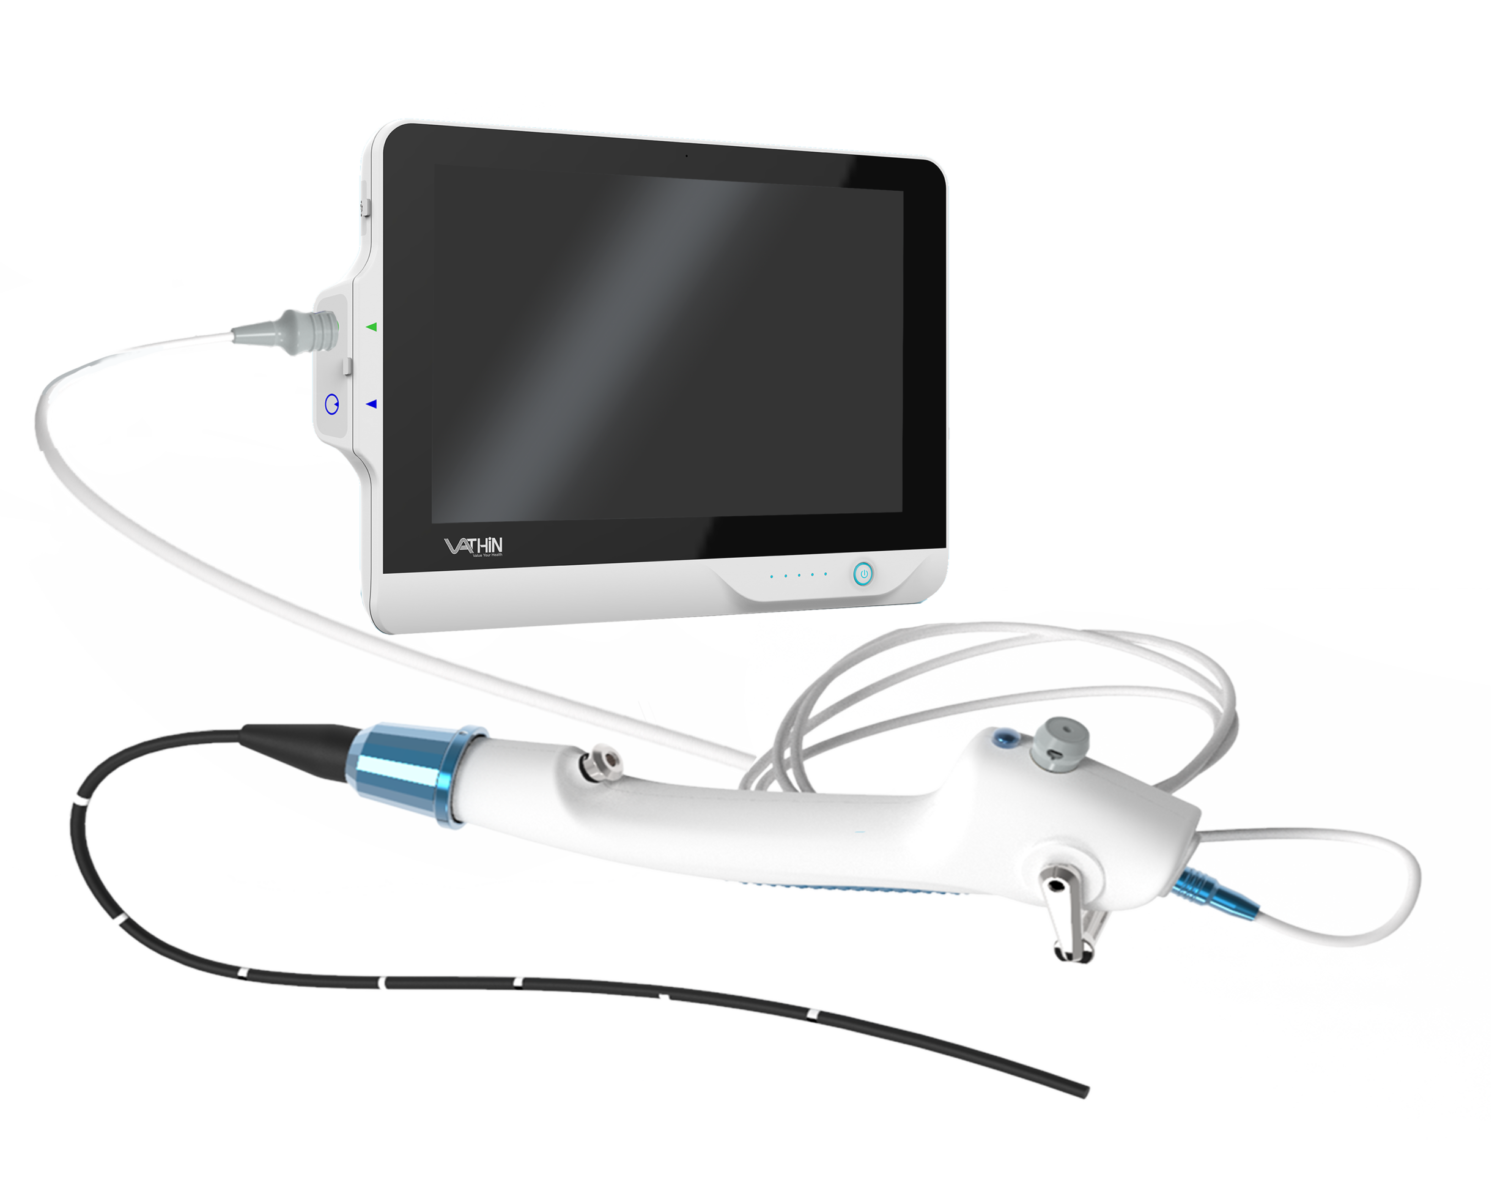 Endoscopy equipment and instruments rigid and flexible. Different